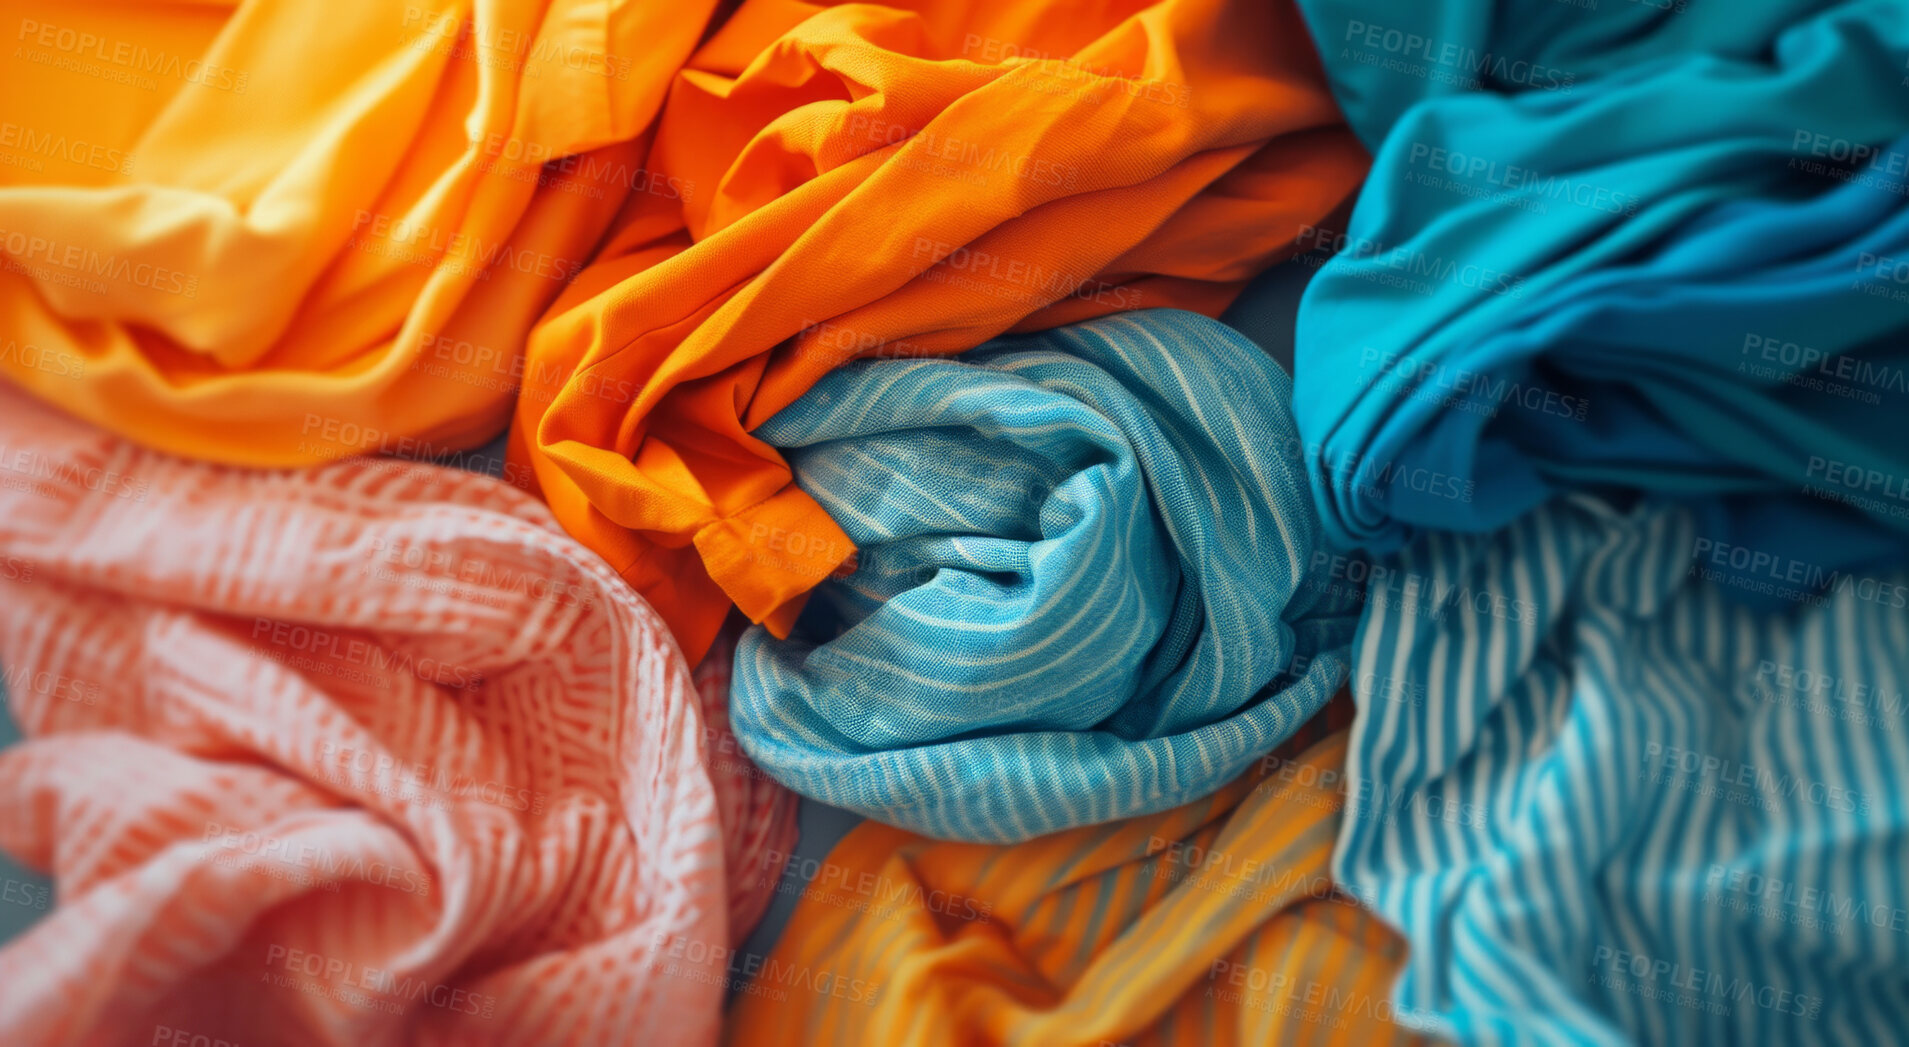 Buy stock photo Clothes, fabric and clean laundry background for laundromat business, service or fabric softener. Colourful, pile or dirty clothing backdrop for mockup, product design or eco friendly cleaning